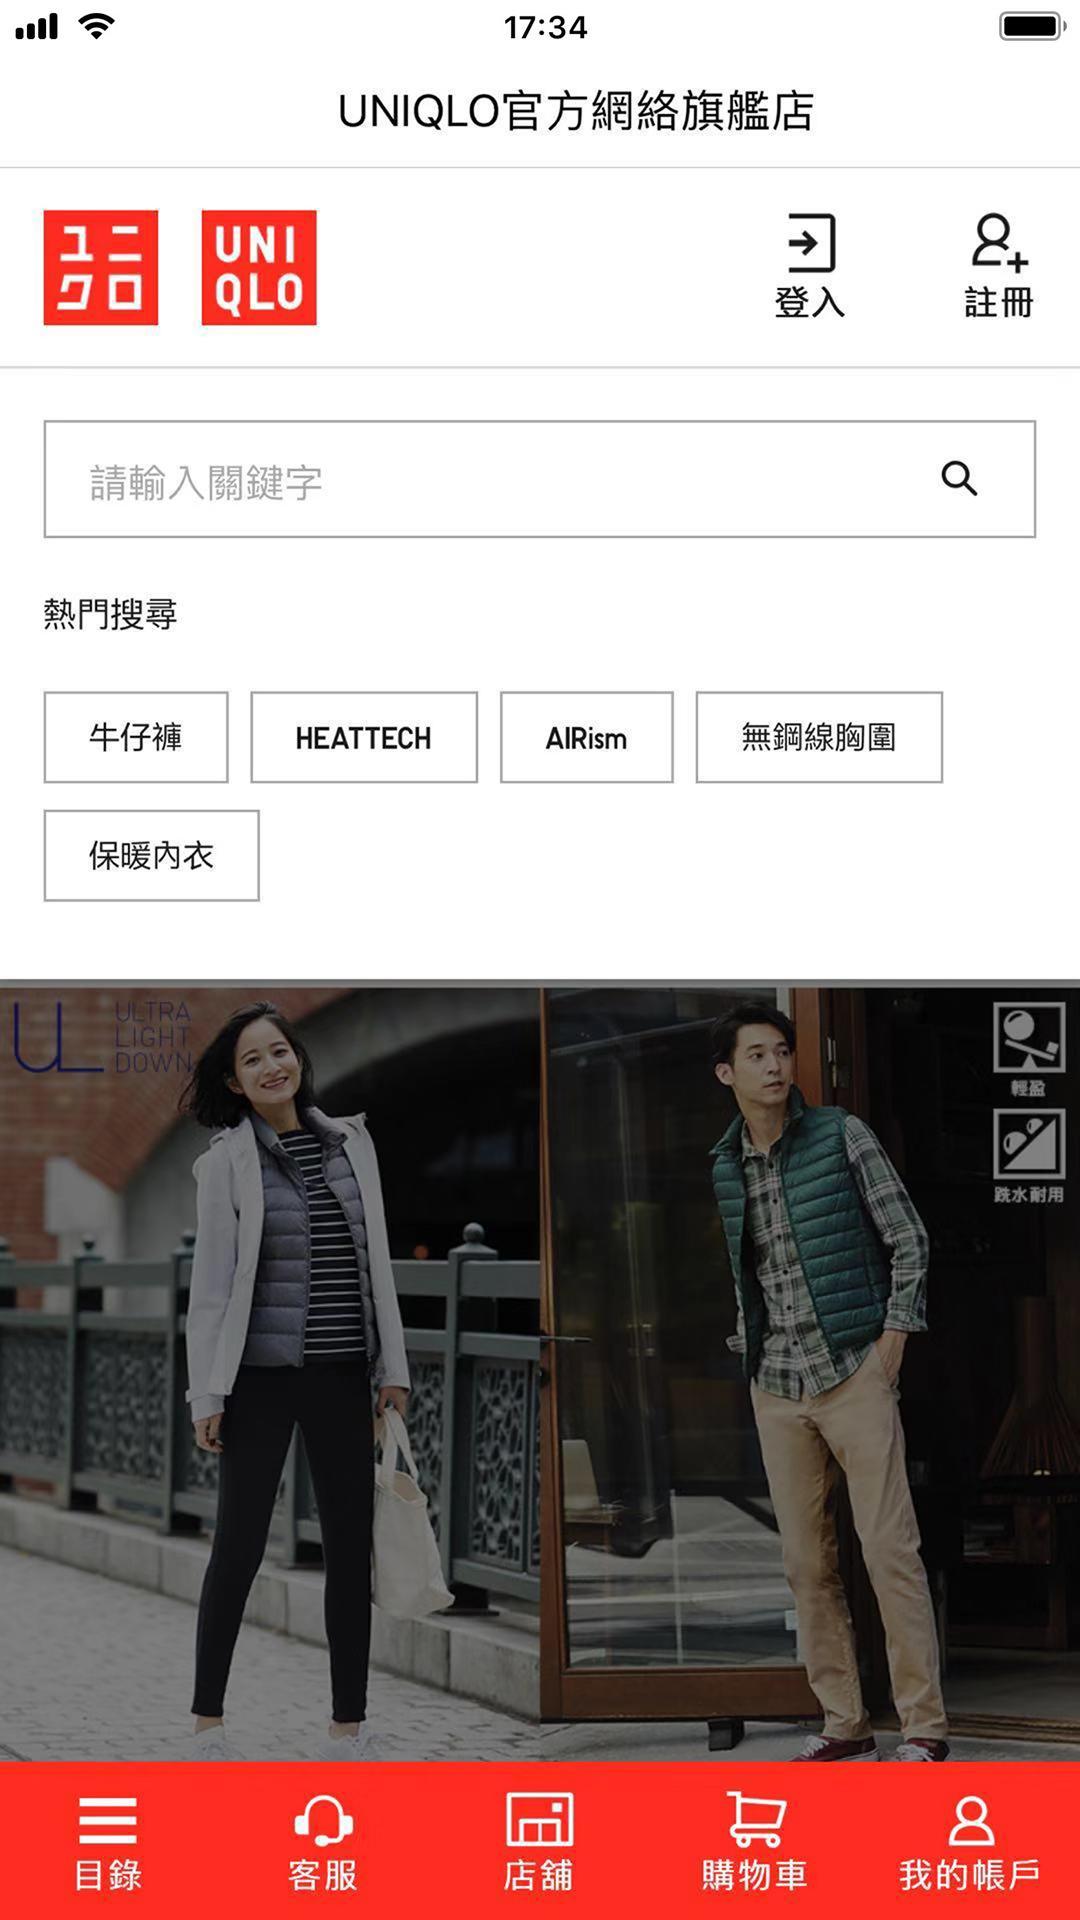 UNIQLO for Android - APK Download